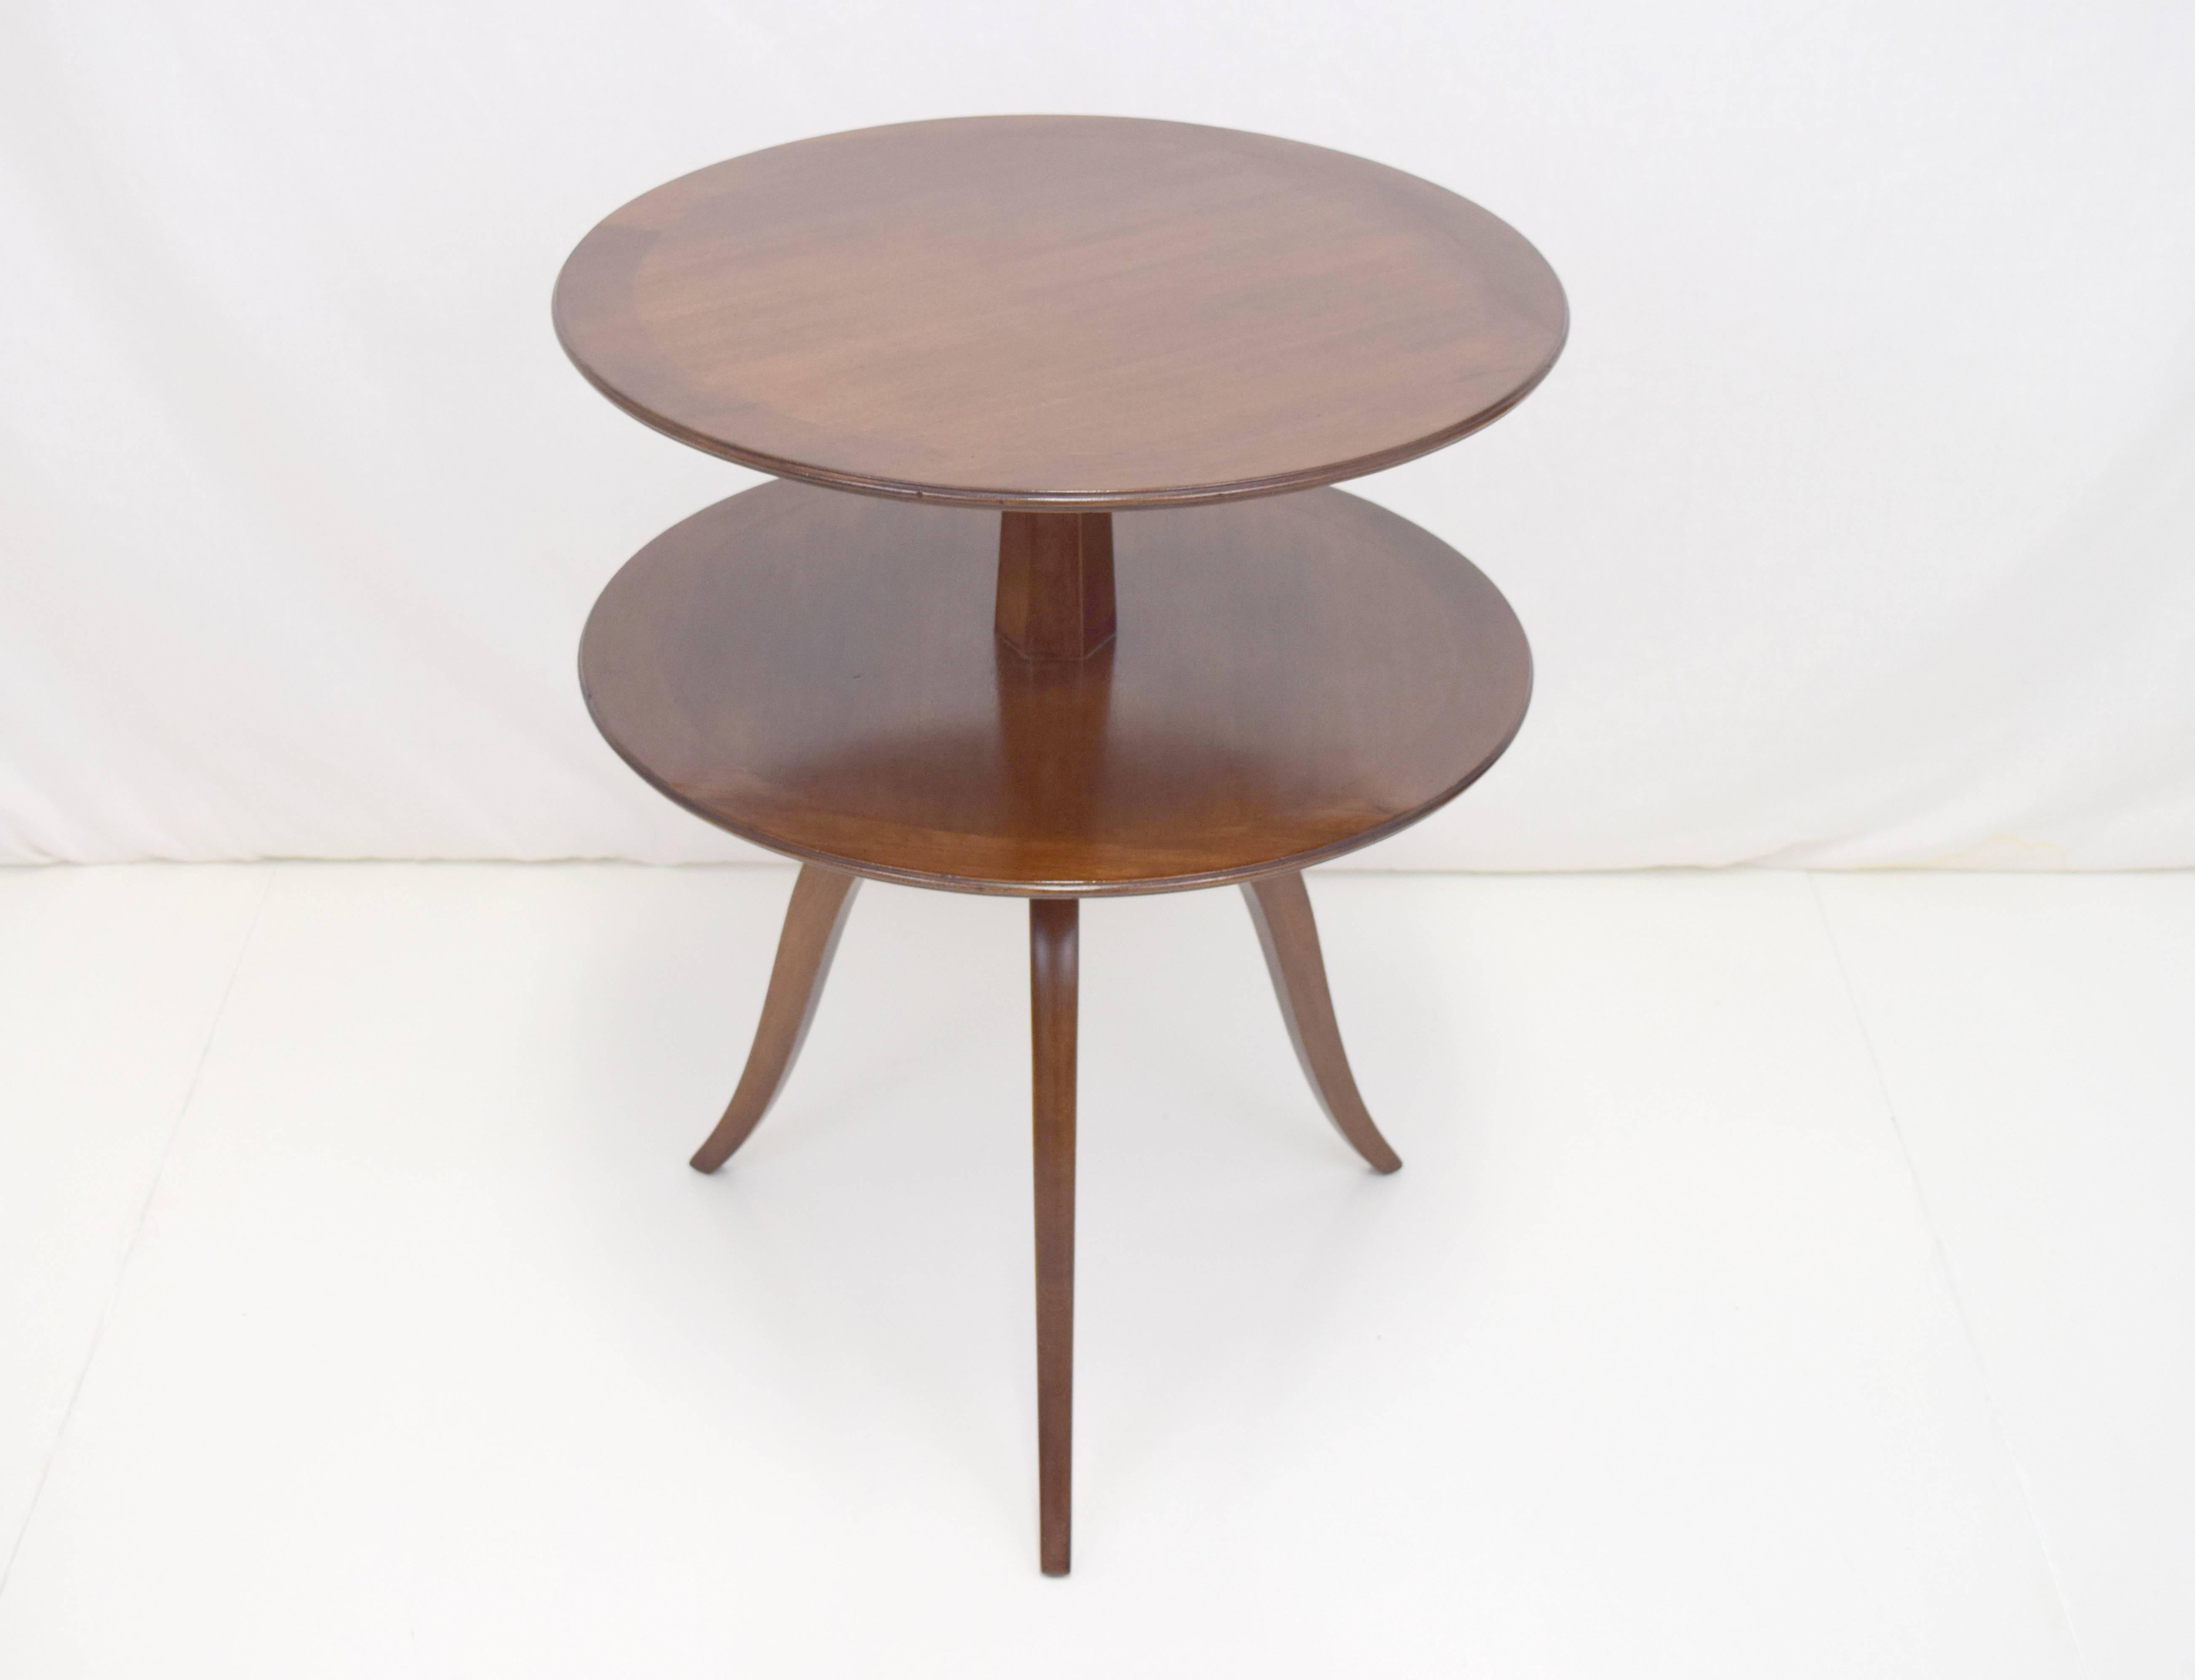 Elegant round tiered table by Edward Wormley for Dunbar. Banded edge surfaces in mahogany with gently curved legs.